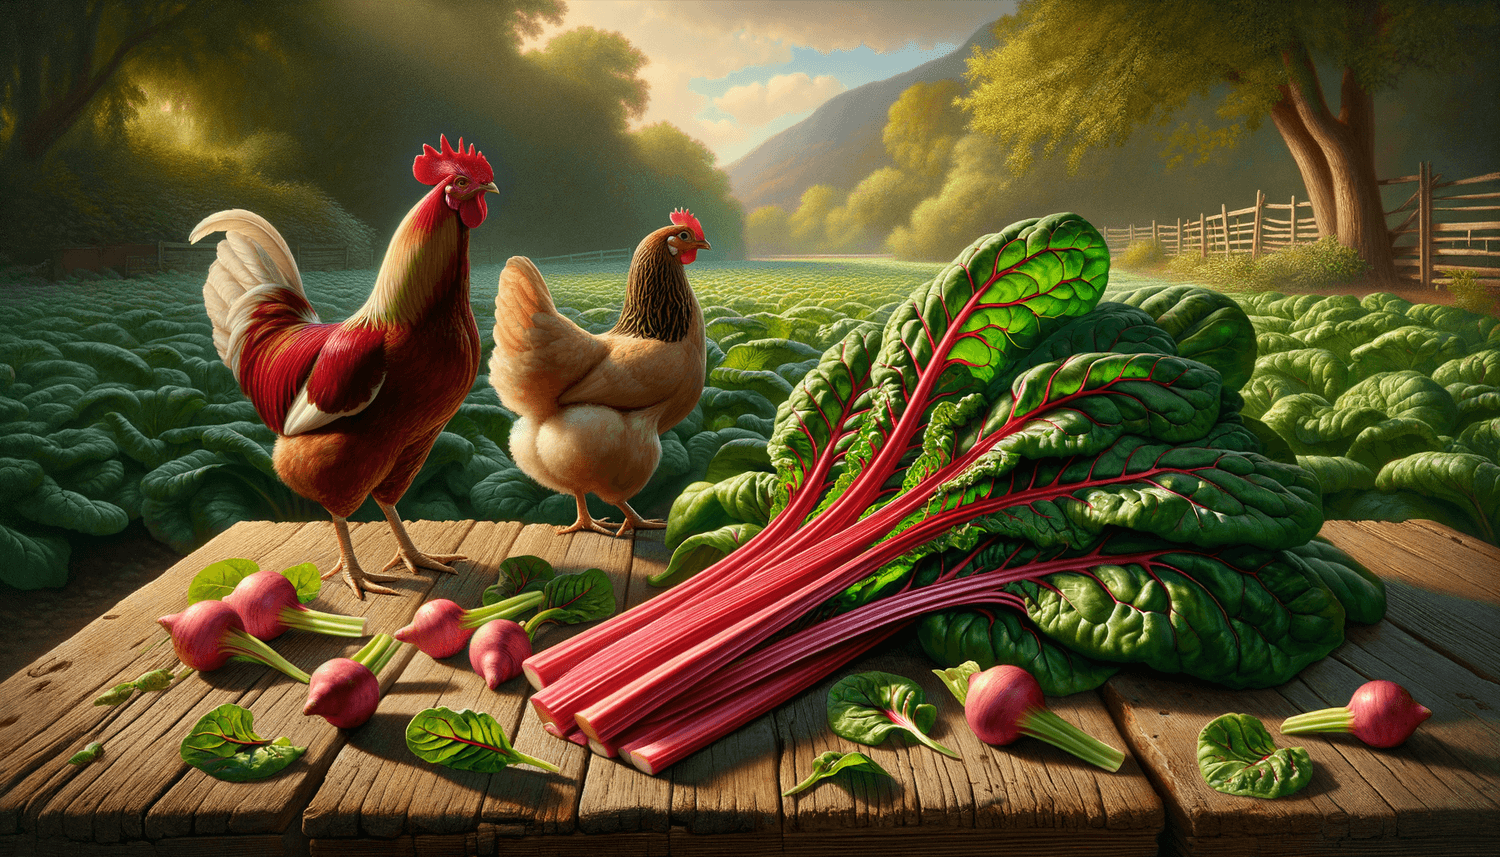 Can Chickens Eat Swiss Chard Stems?